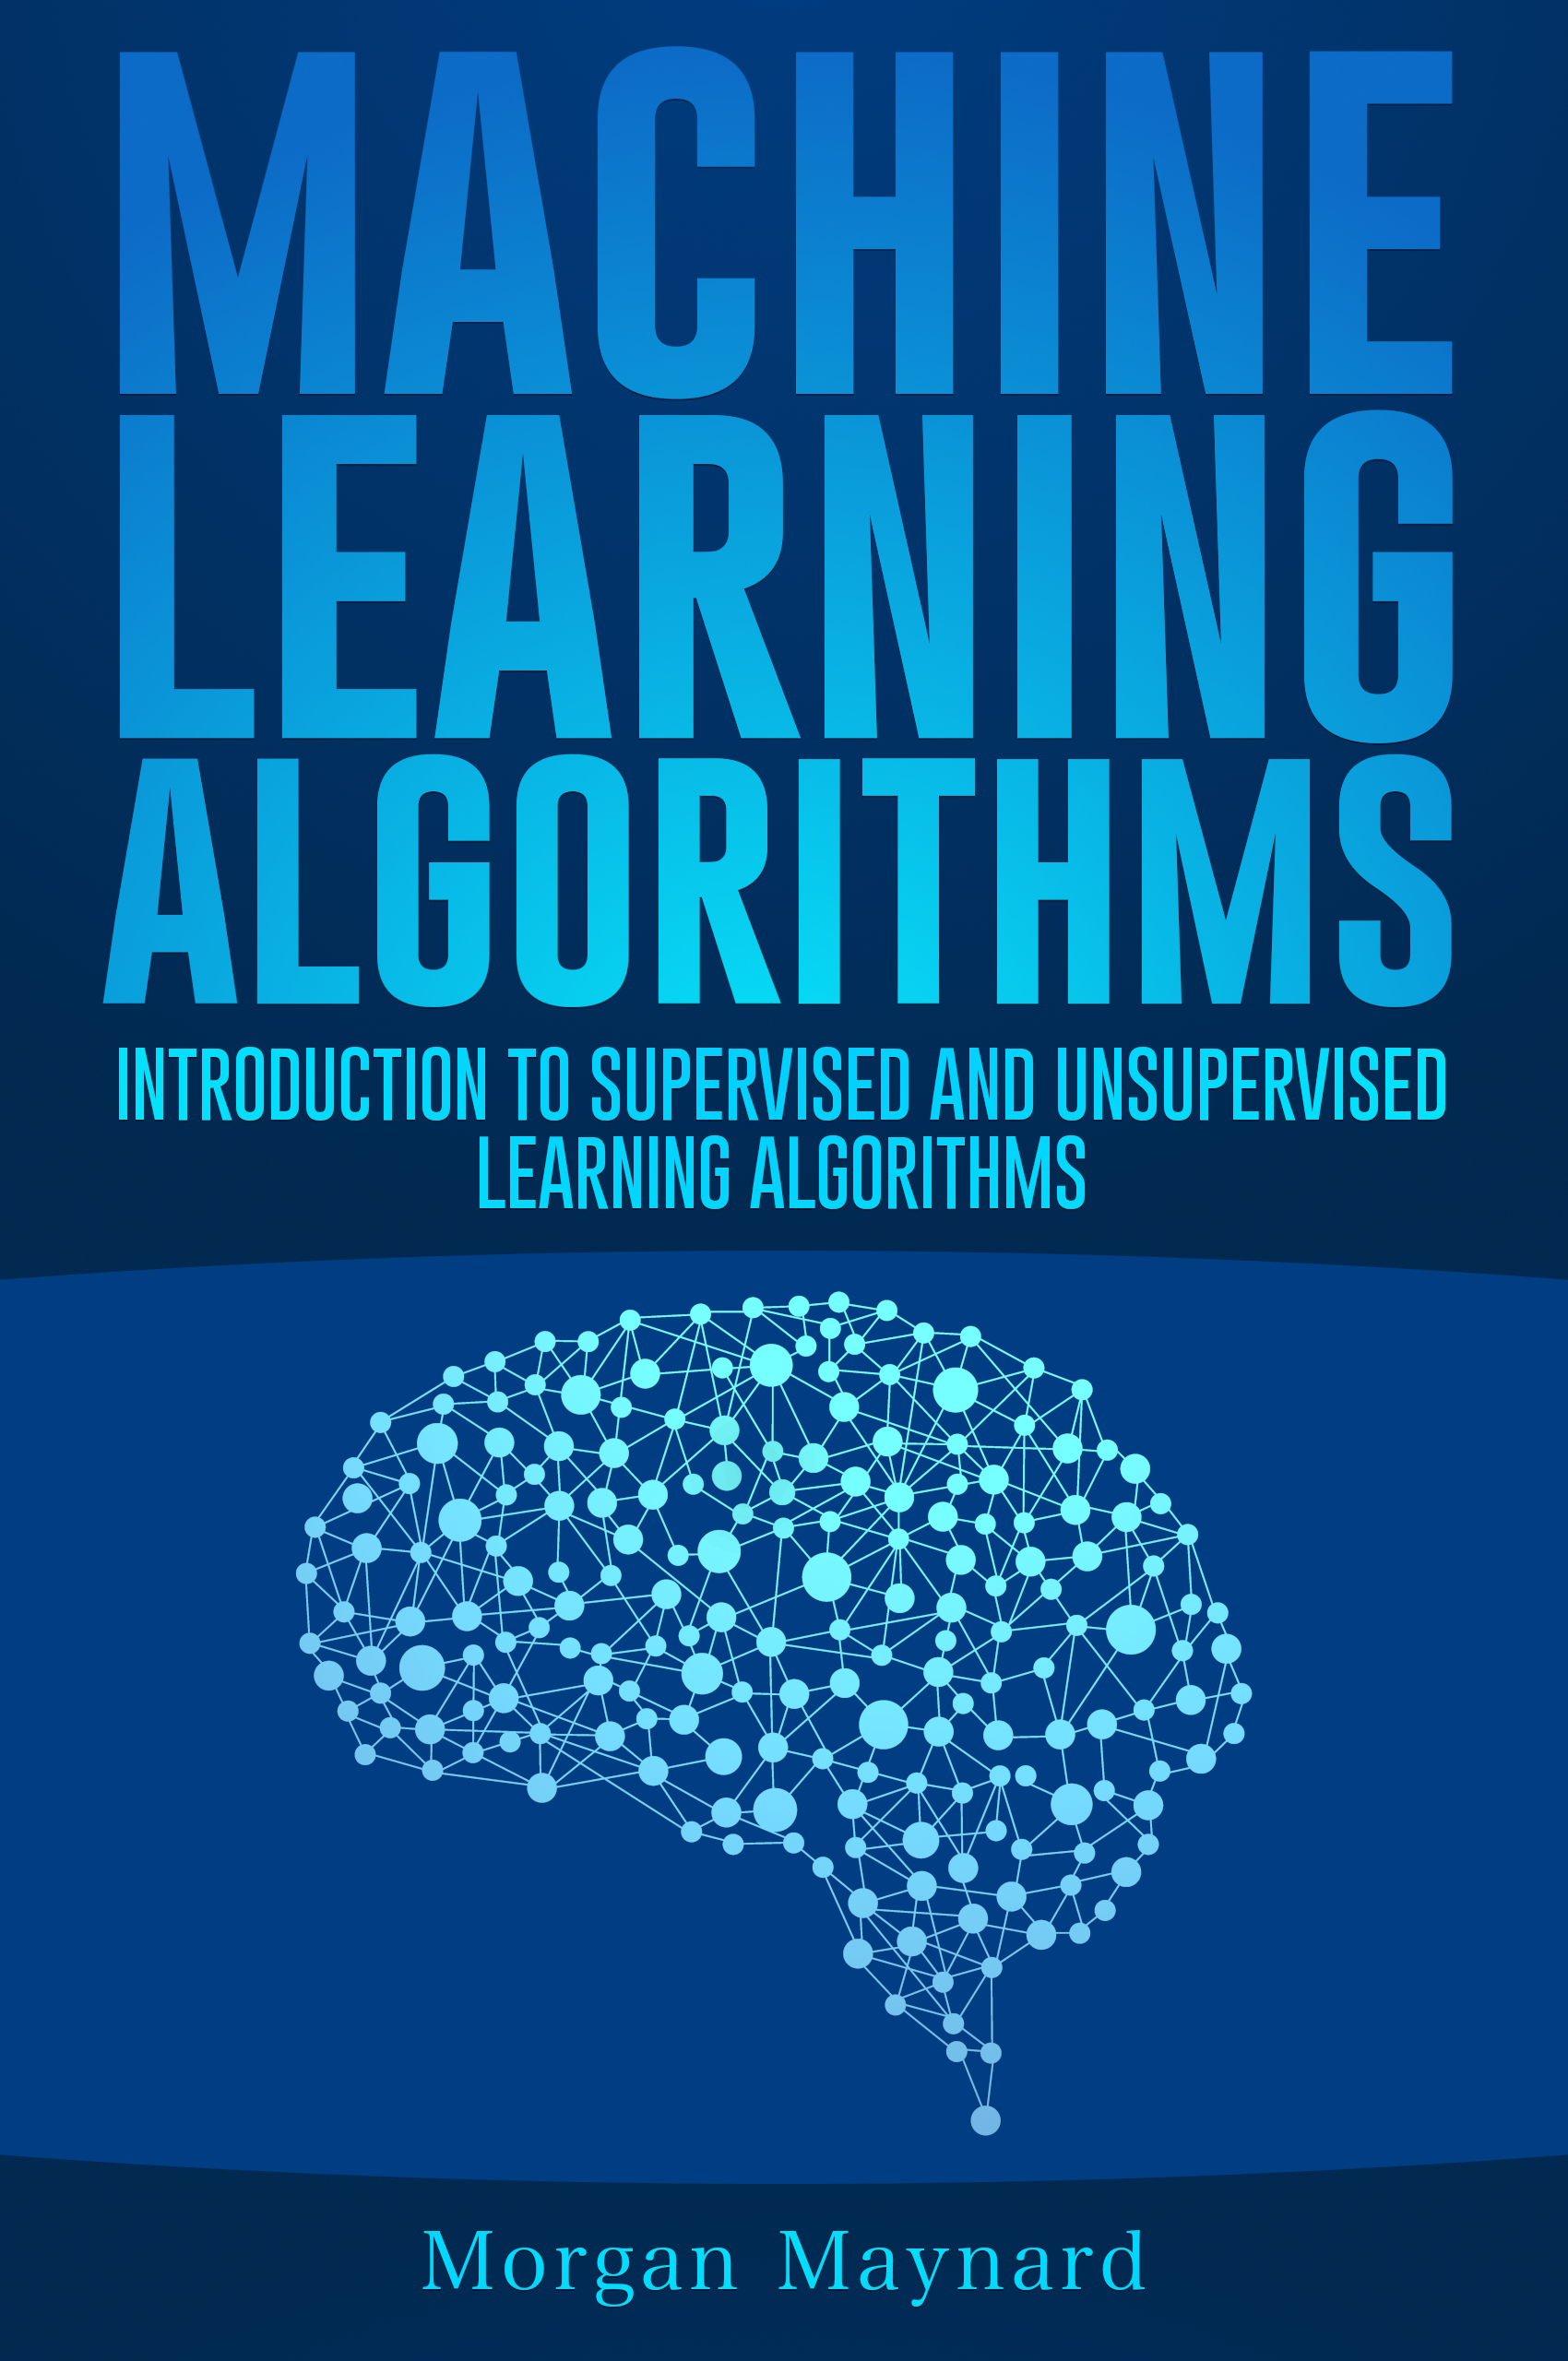 FREE: Machine Learning: Introduction to Supervised and Unsupervised Learning Algorithms with Real-World Applications by morgan maynard